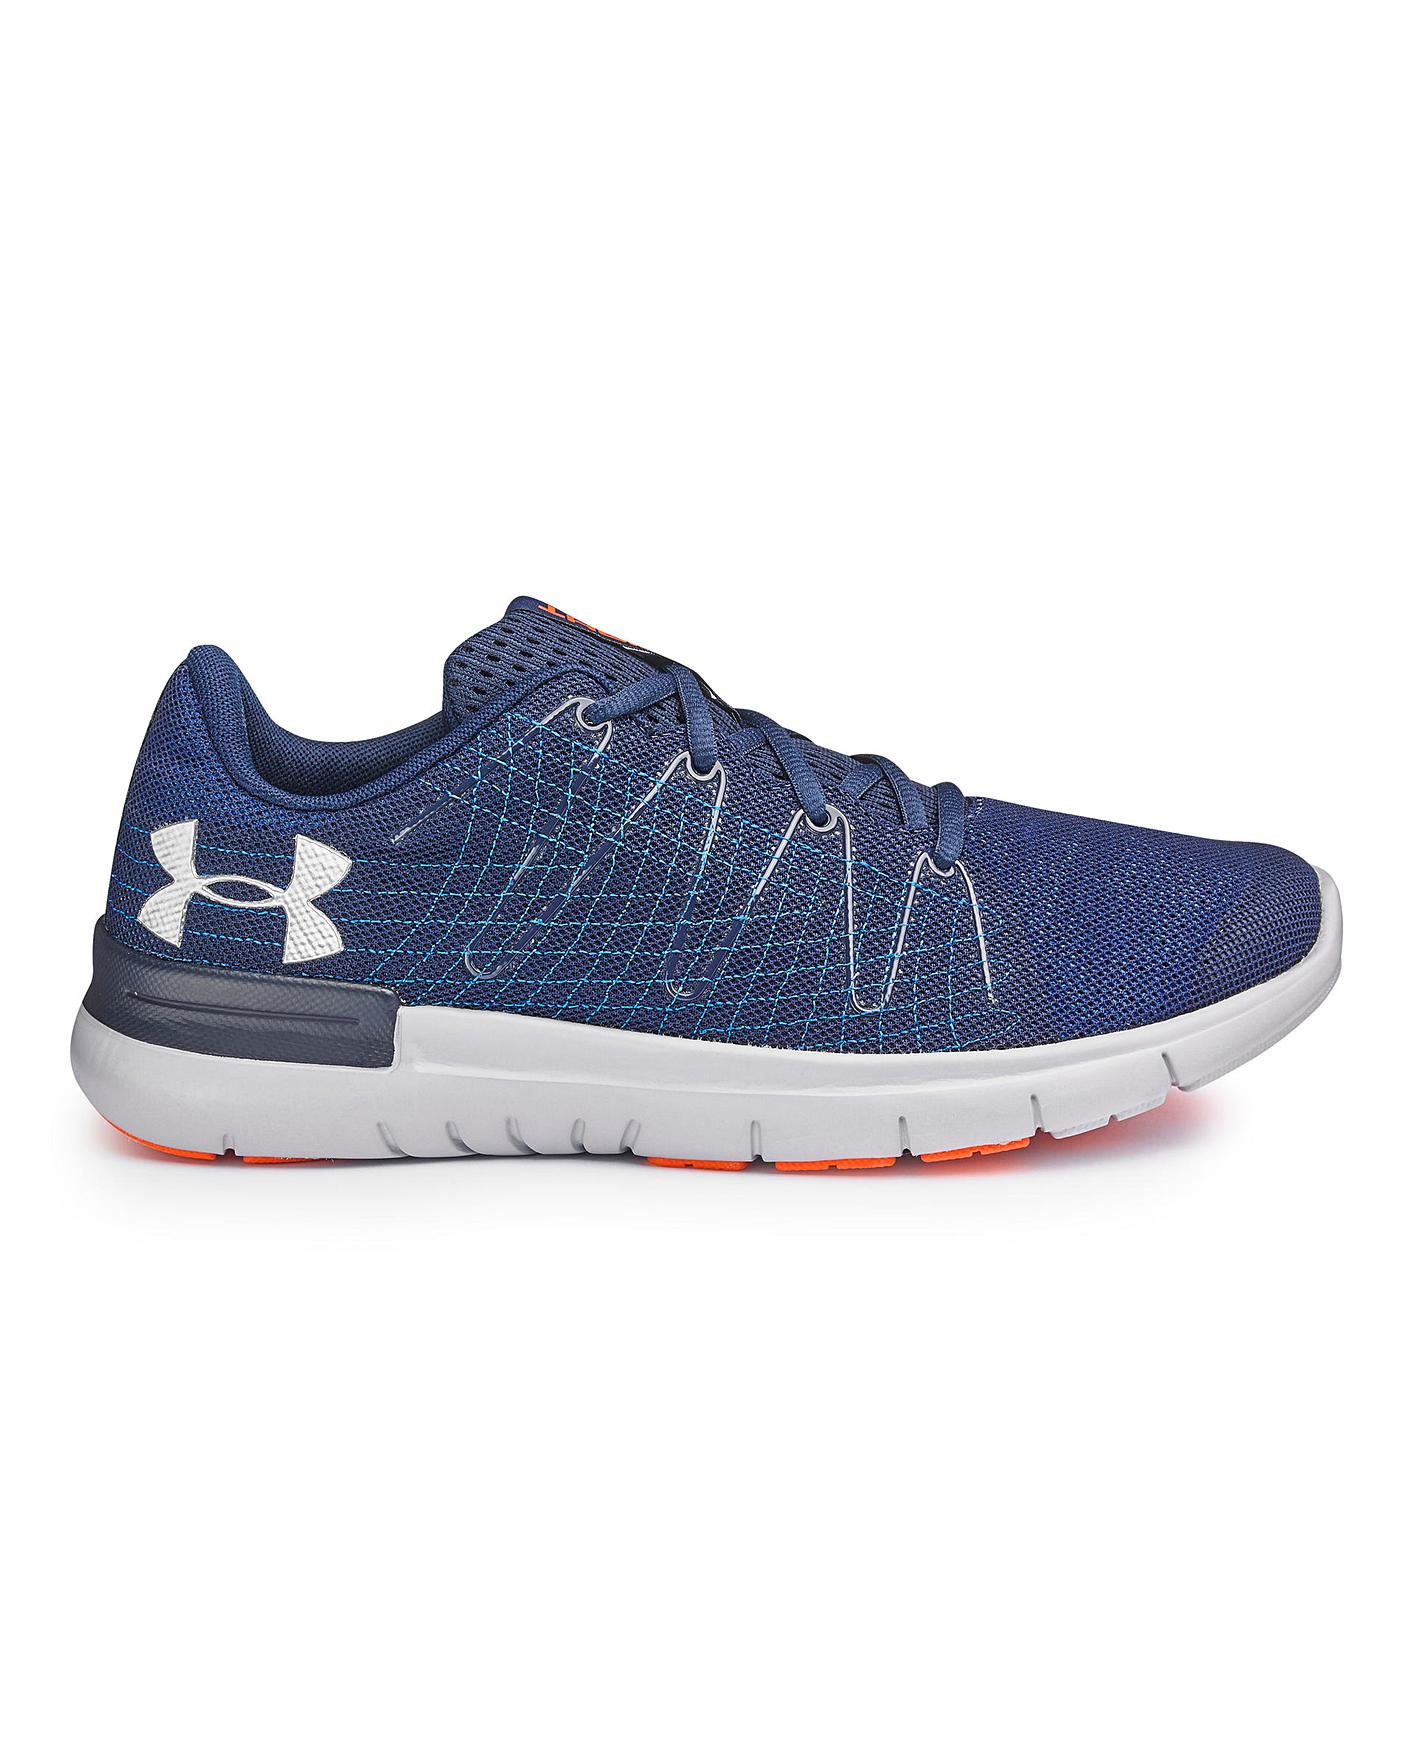 Under Armour Thrill 3 Mens Trainers 